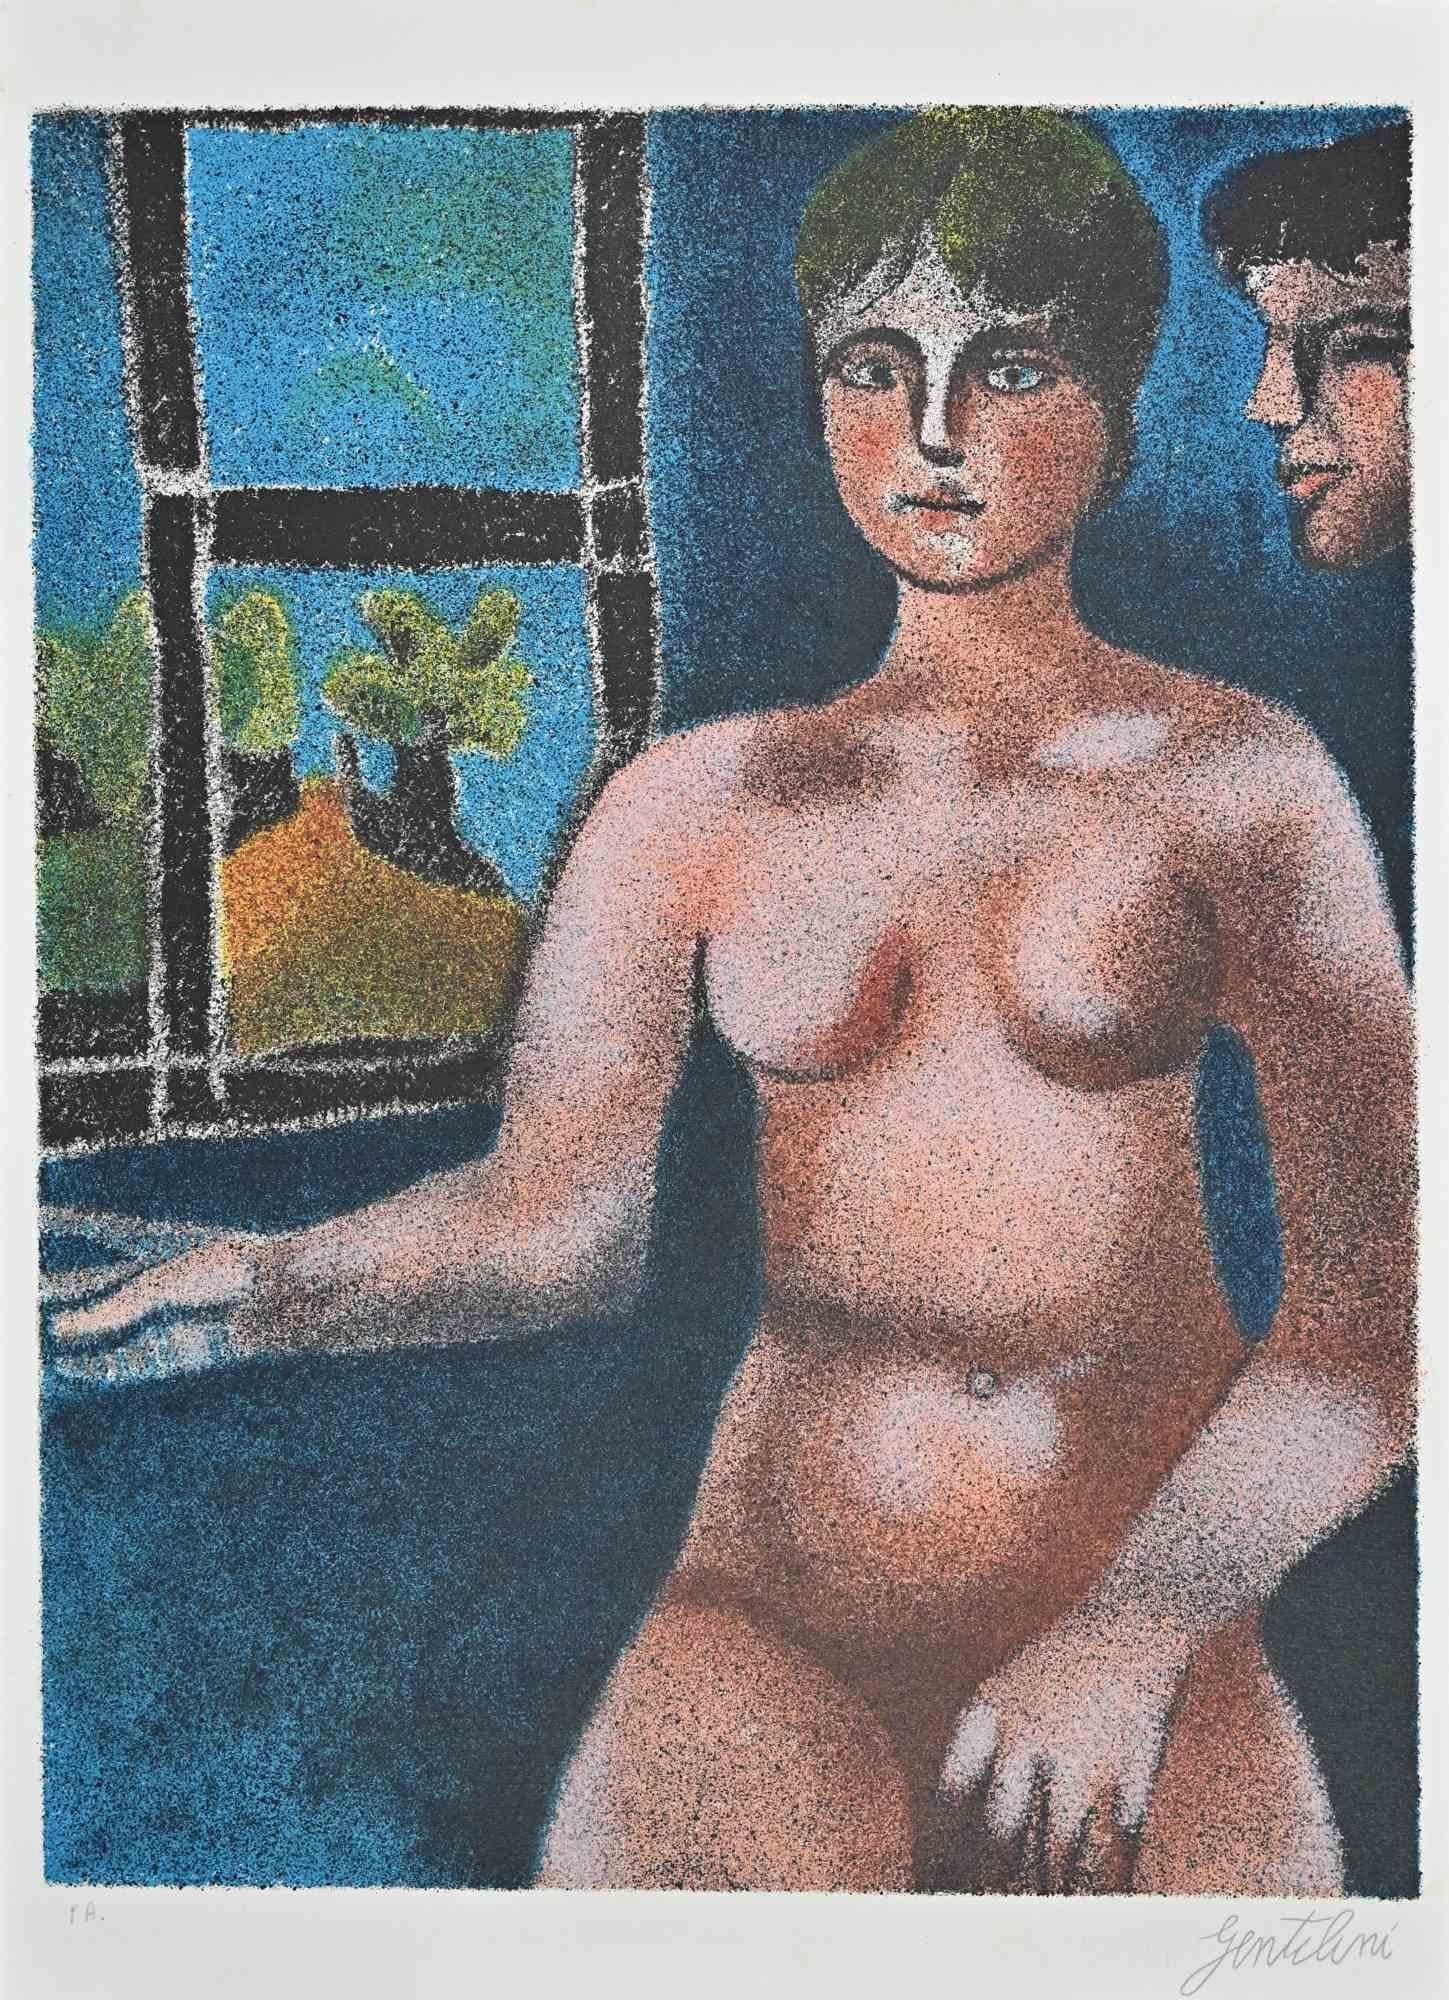 Nude of Woman is a Lithograph realized by Franco Gentilini (Italian Painter, 1909-1981) in the 1970s.

The state of preservation of the artwork is excellent.

Hand-signed.

Artist's proof.

Franco Gentilini ( Italian Painter, 1909-1981): Gentilini's